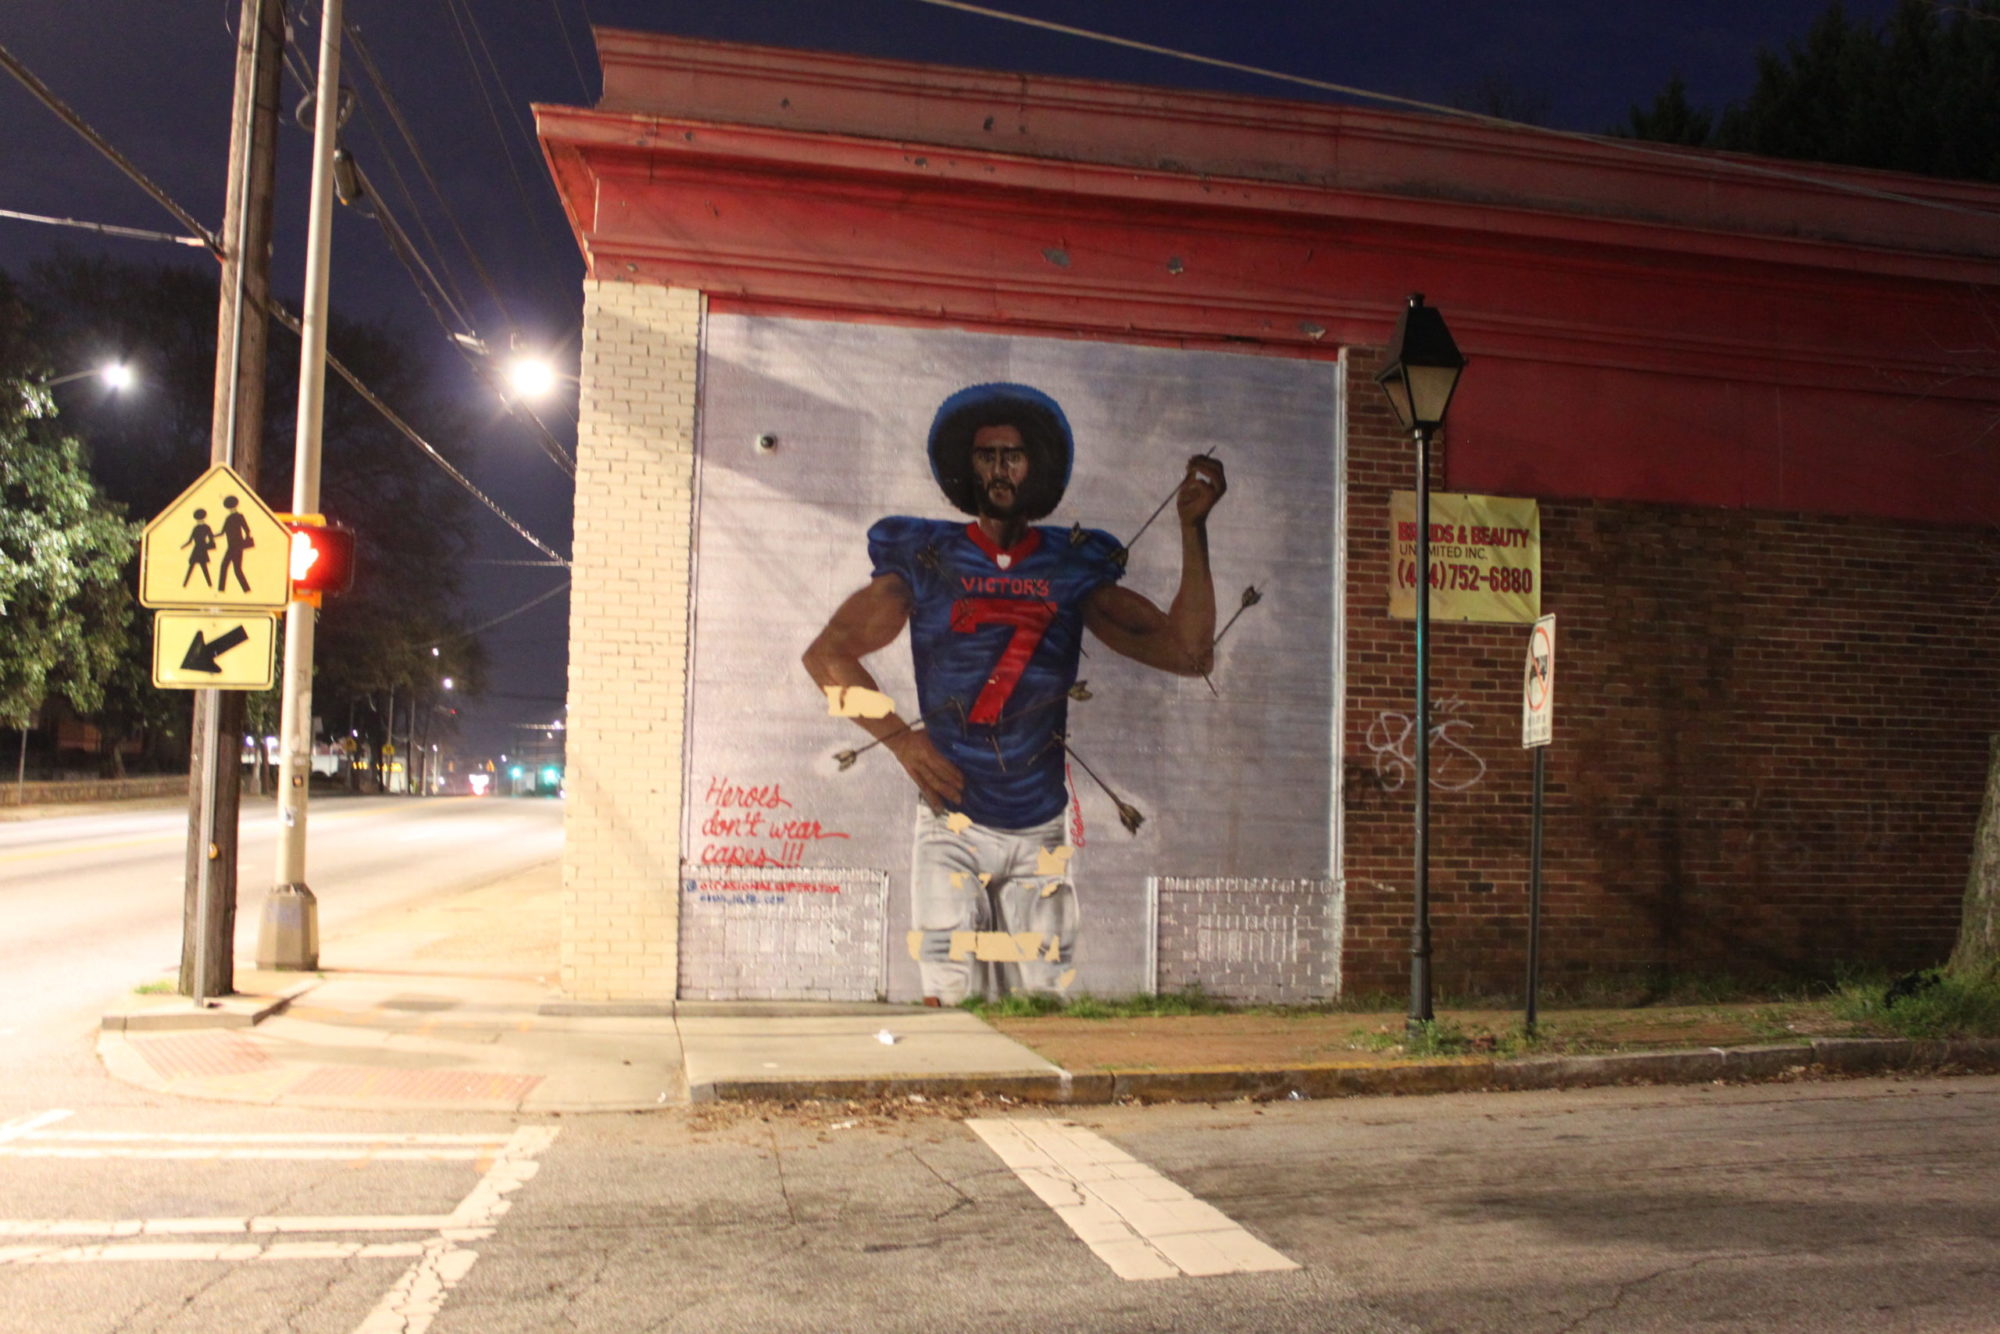 A mural on the side of a red-brick building features Colin Kaepernick wearing his football jersey. He is pierced with arrows and the bottom left corner reads, 